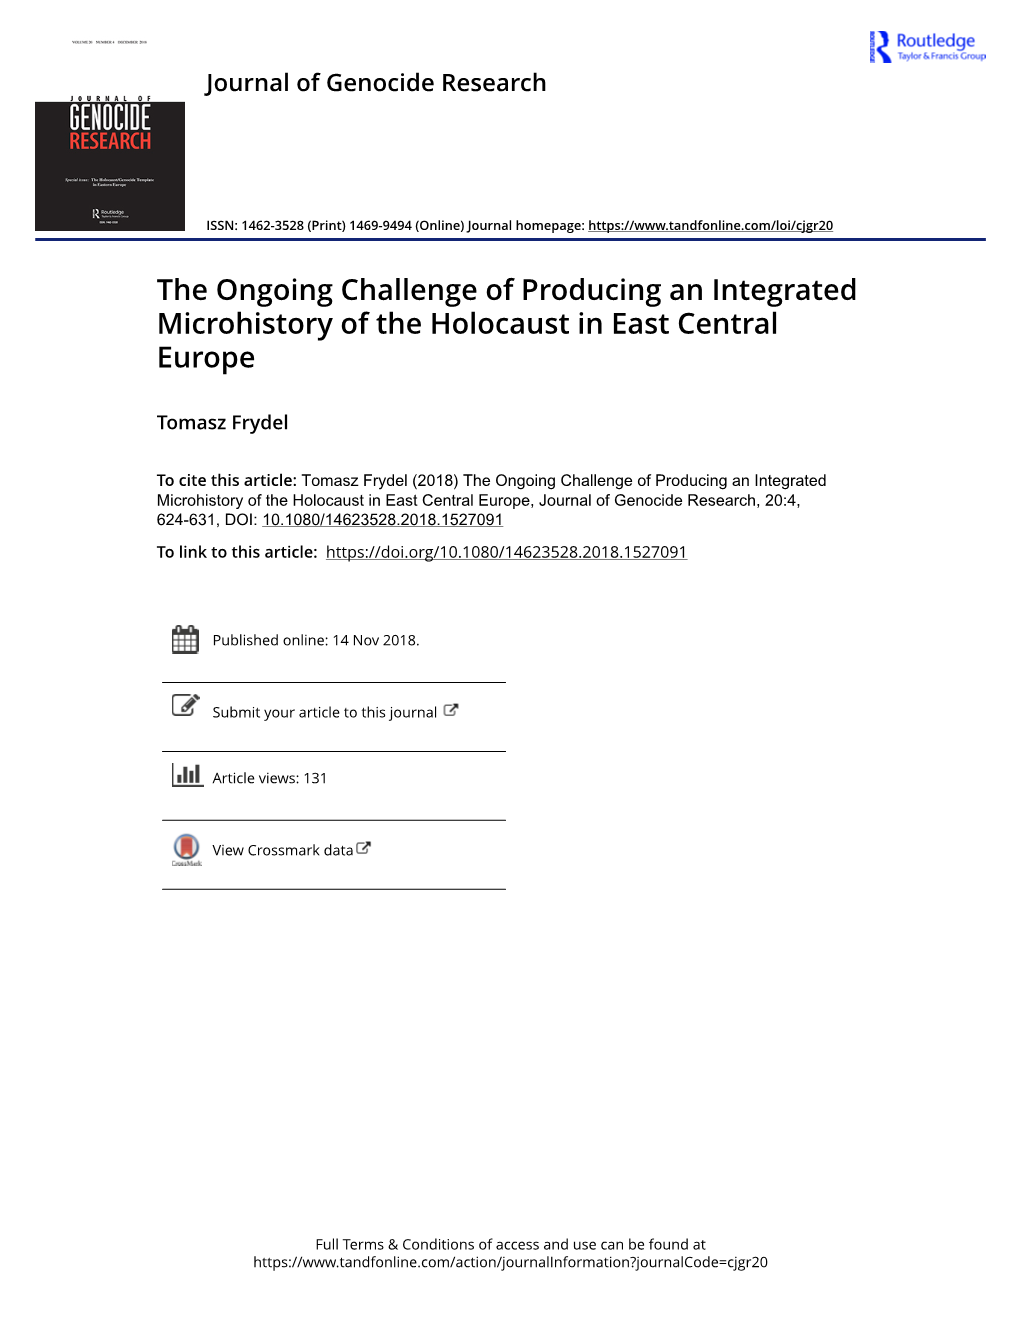 The Ongoing Challenge of Producing an Integrated Microhistory of the Holocaust in East Central Europe